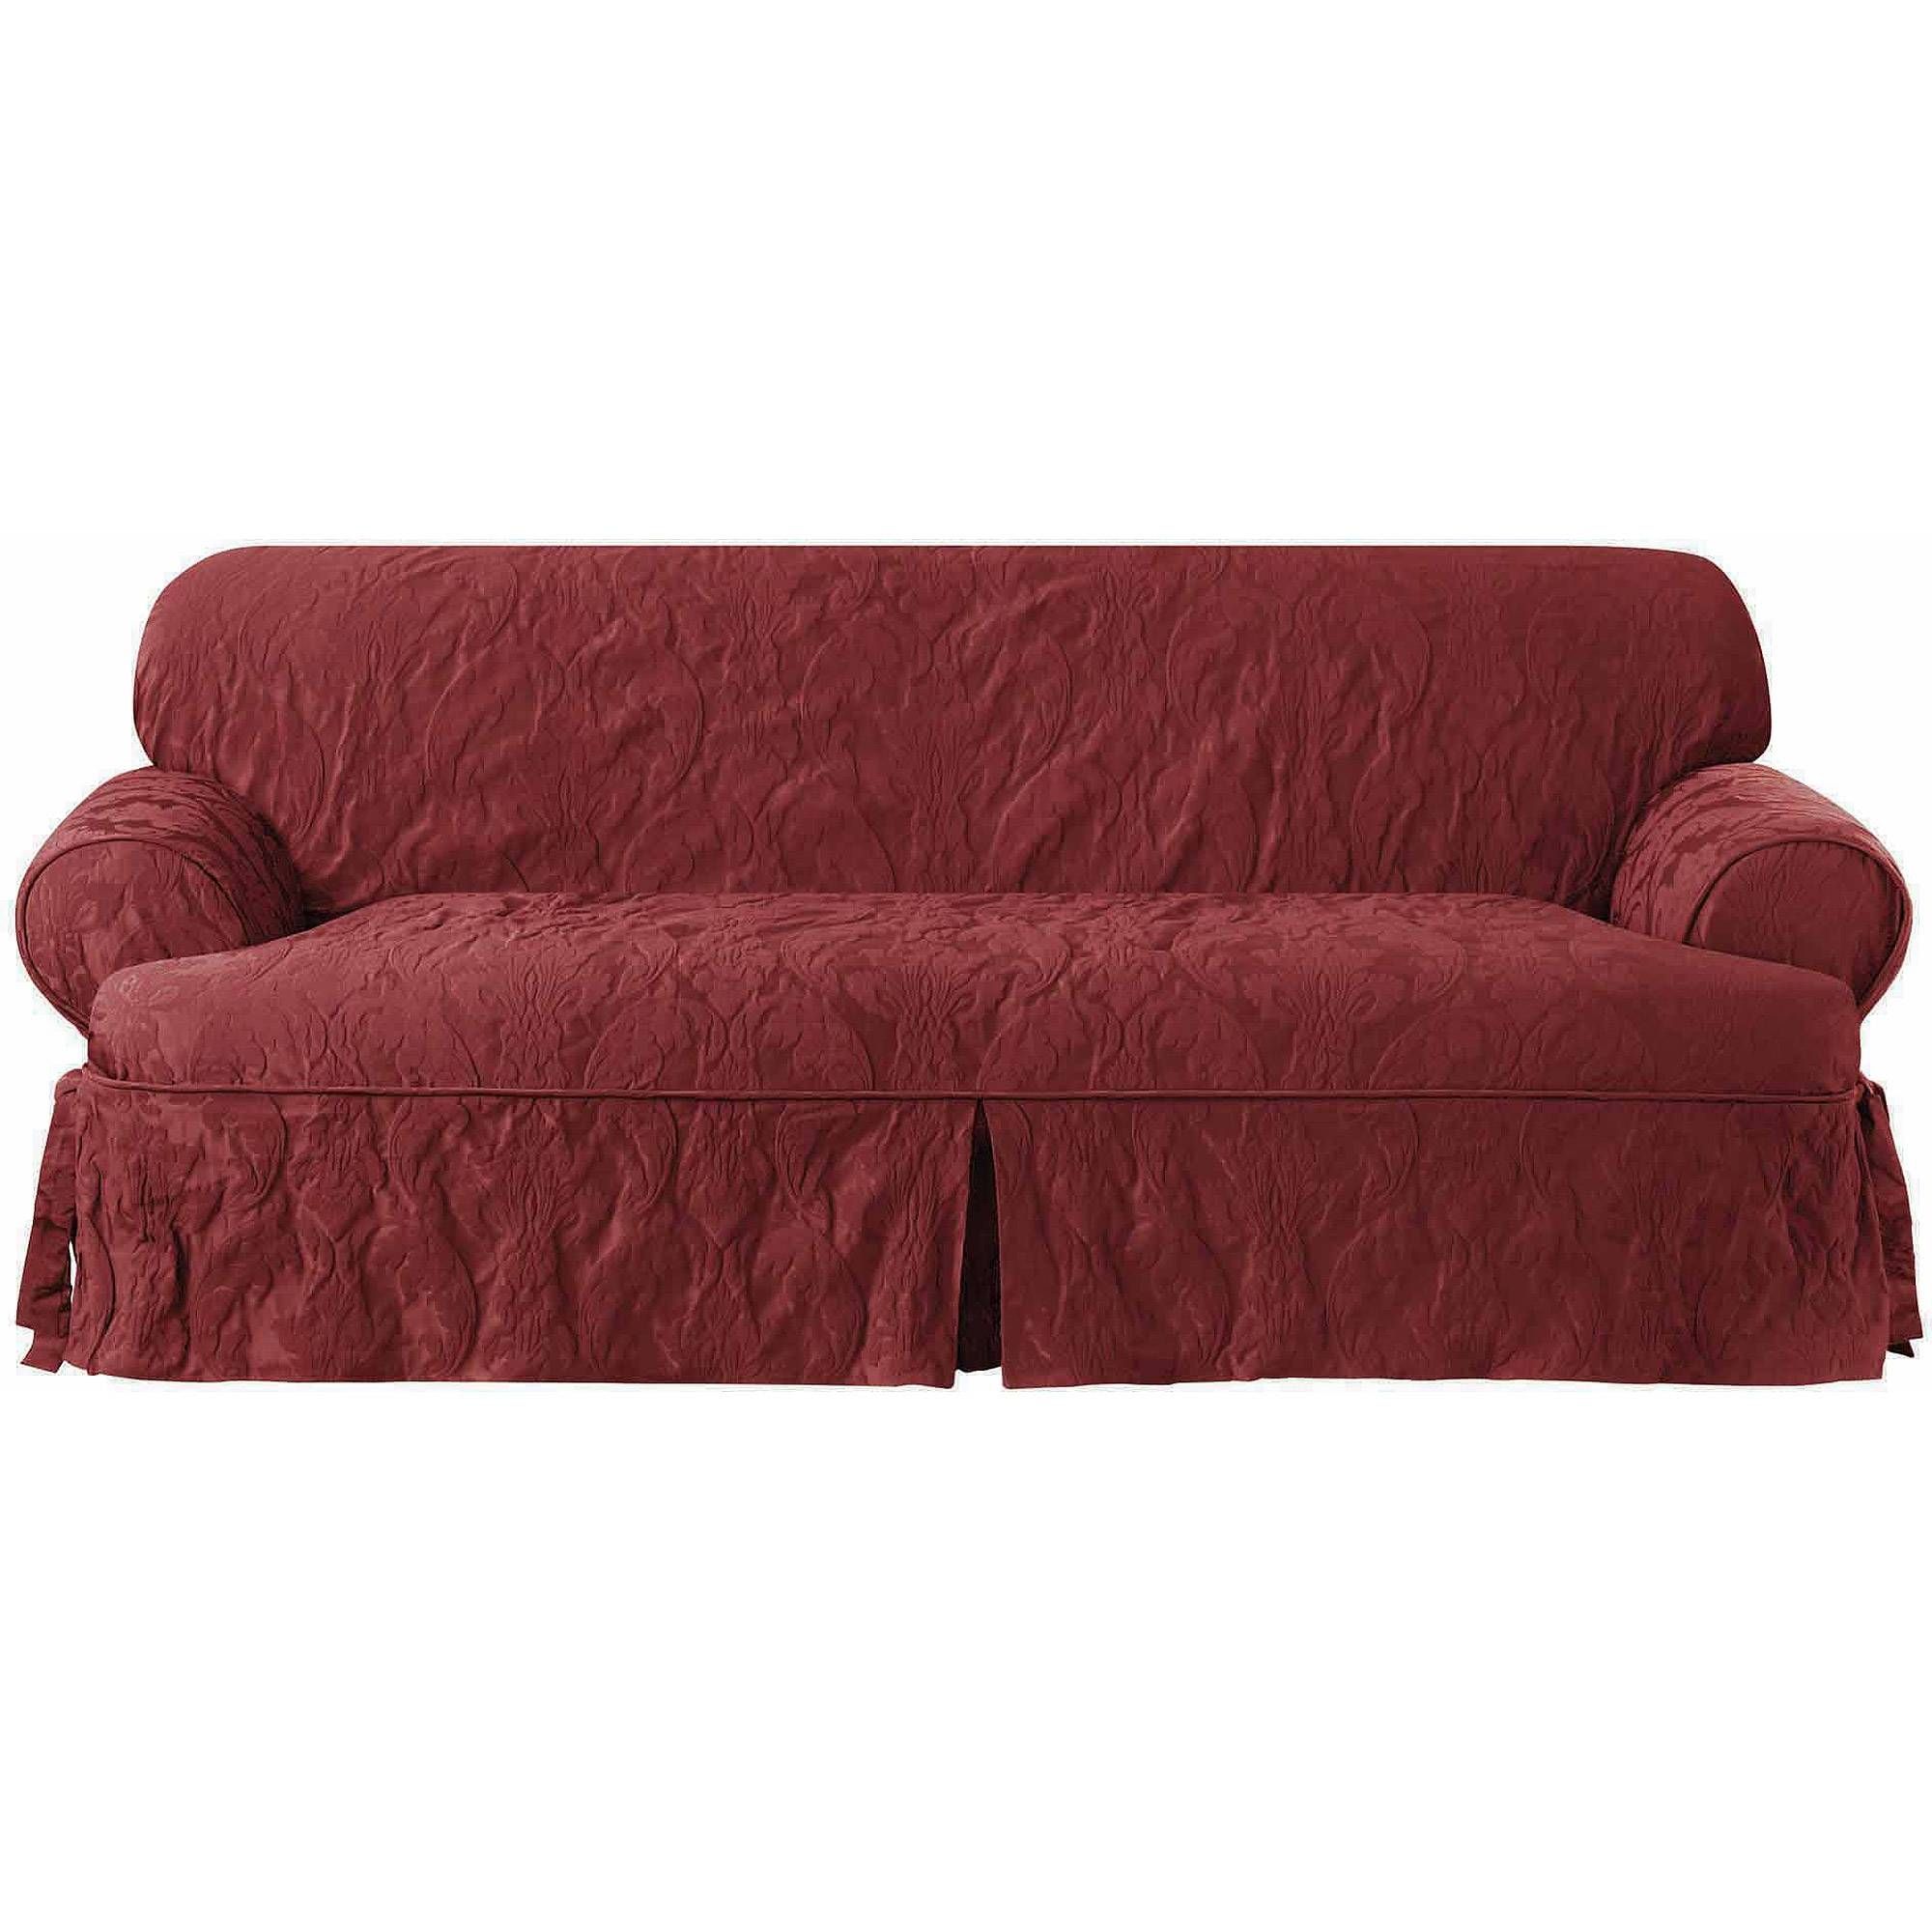 Furniture: Update Your Living Room With Best Sofa Slipcover Design Pertaining To Large Sofa Slipcovers (View 15 of 30)